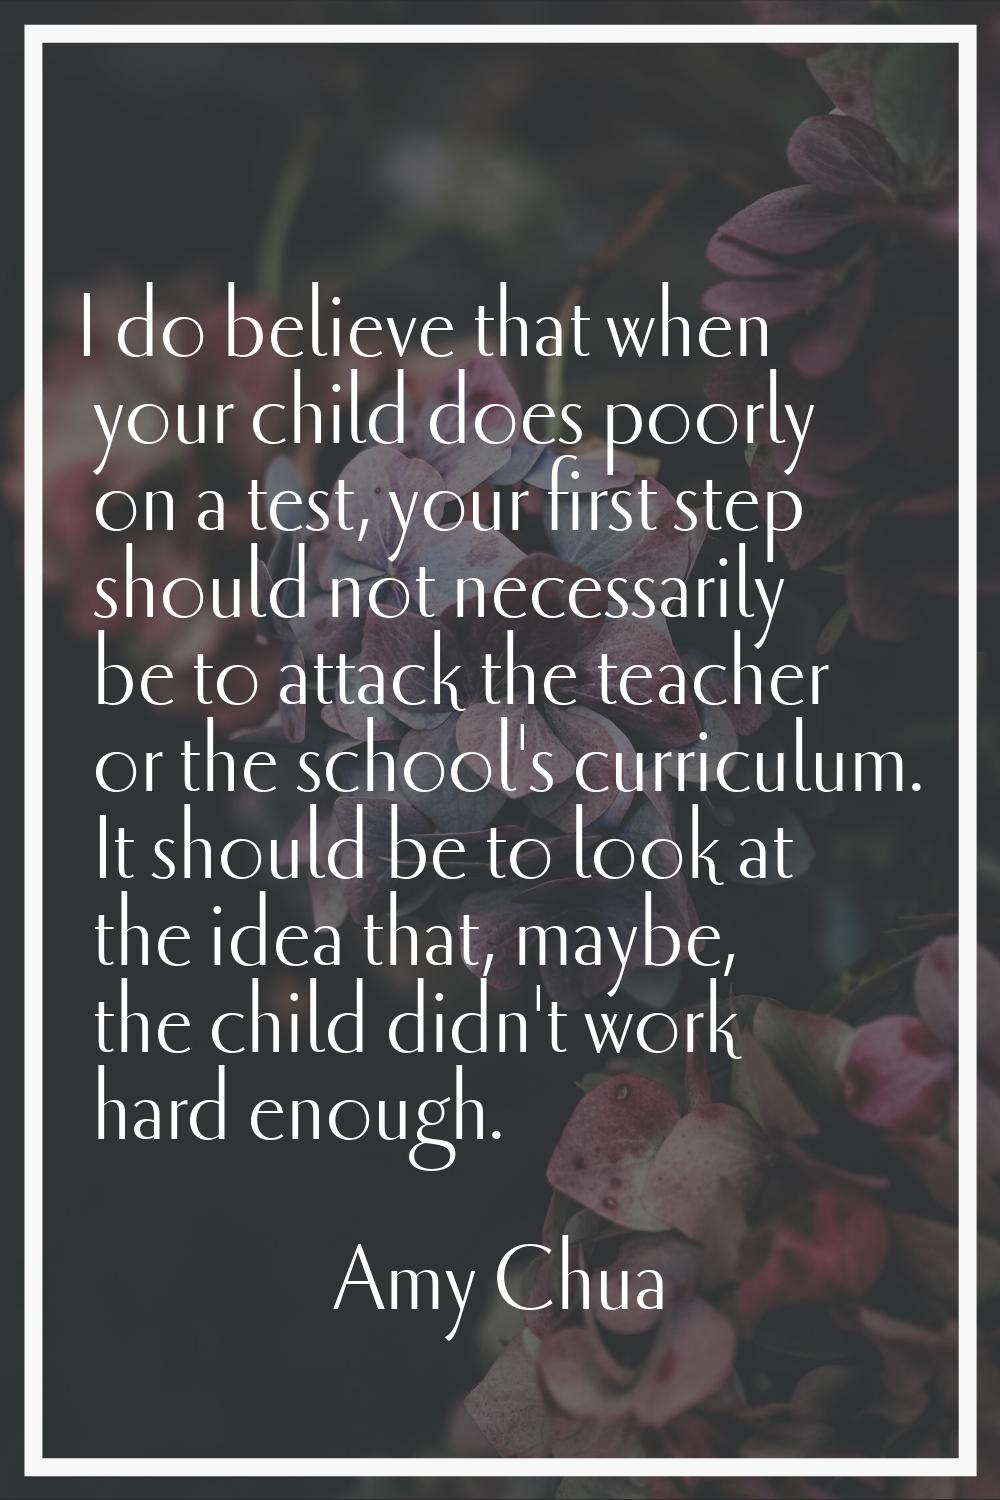 I do believe that when your child does poorly on a test, your first step should not necessarily be 